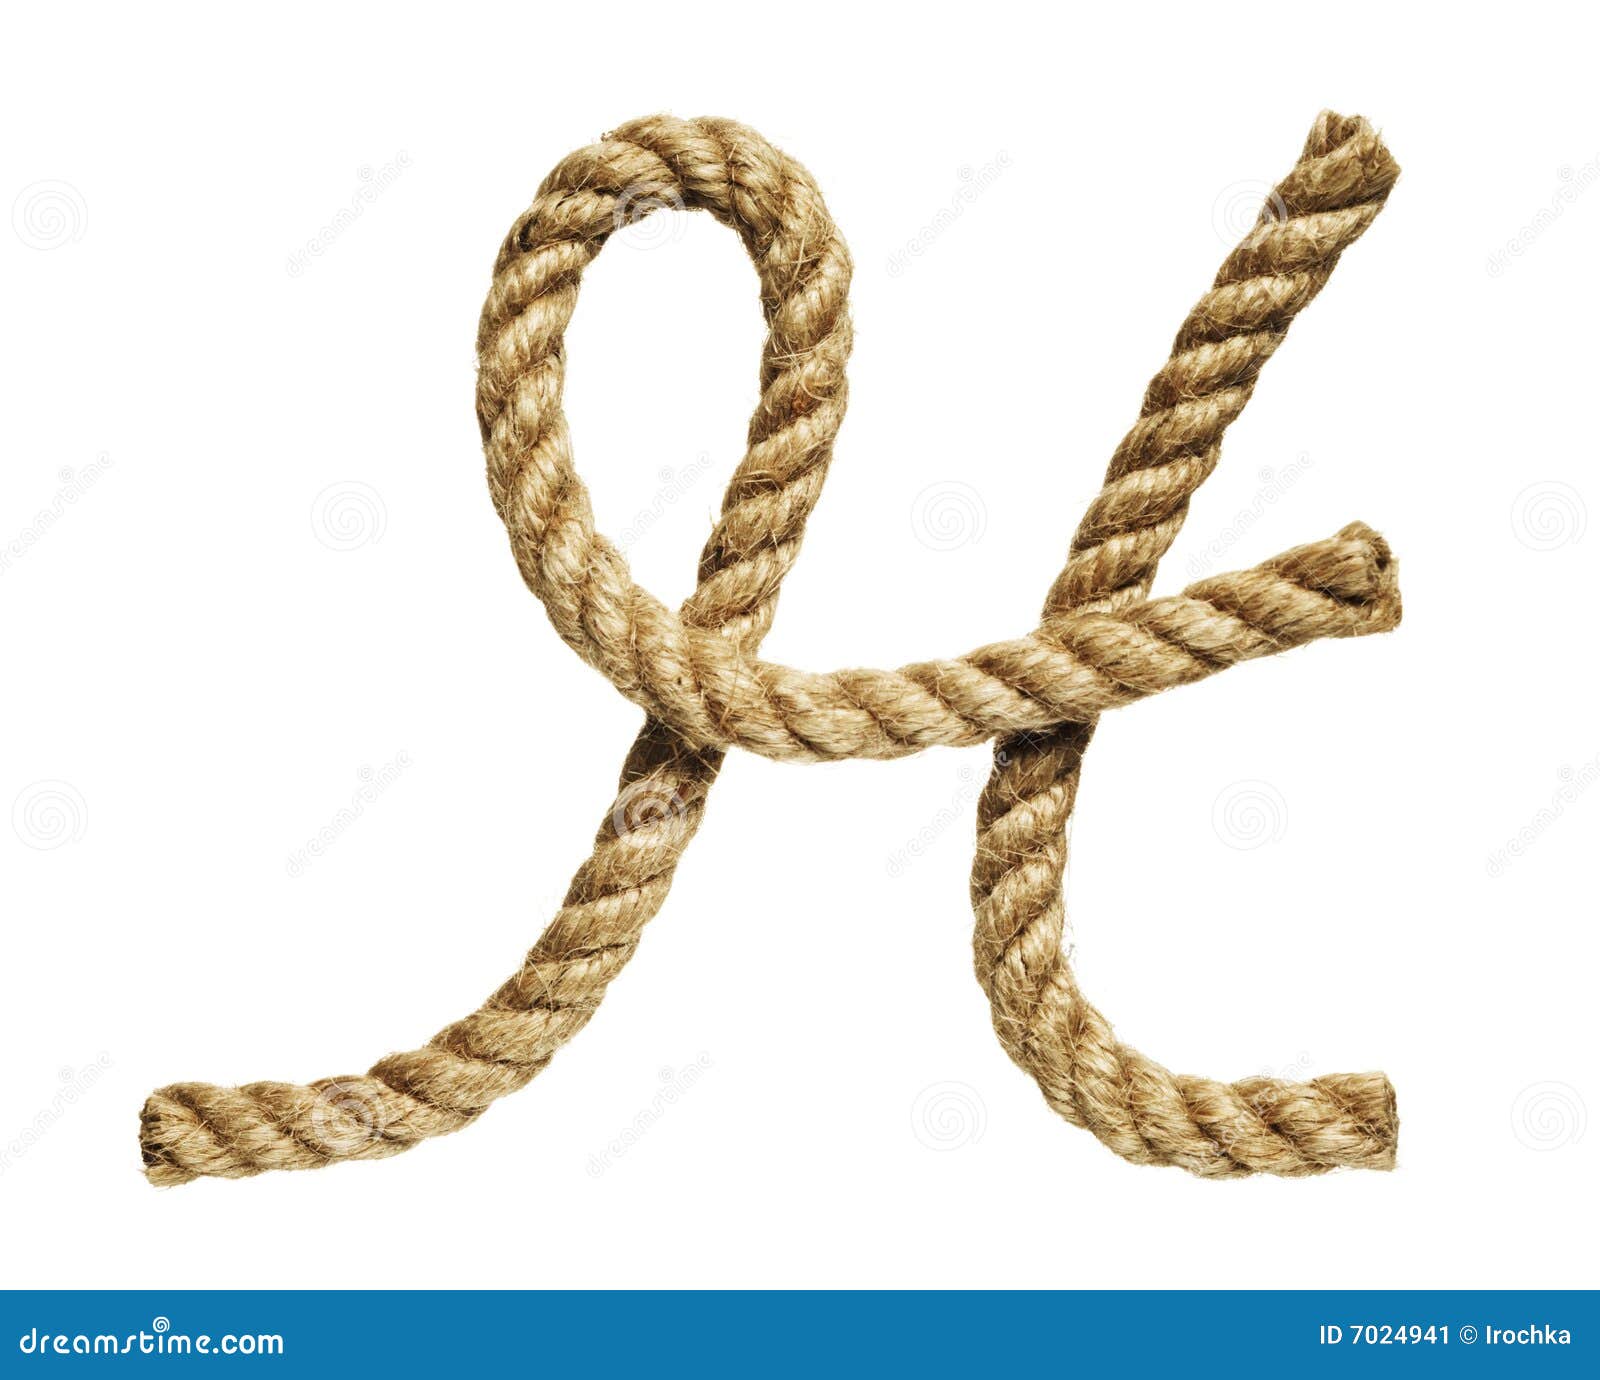 rope forming letter h